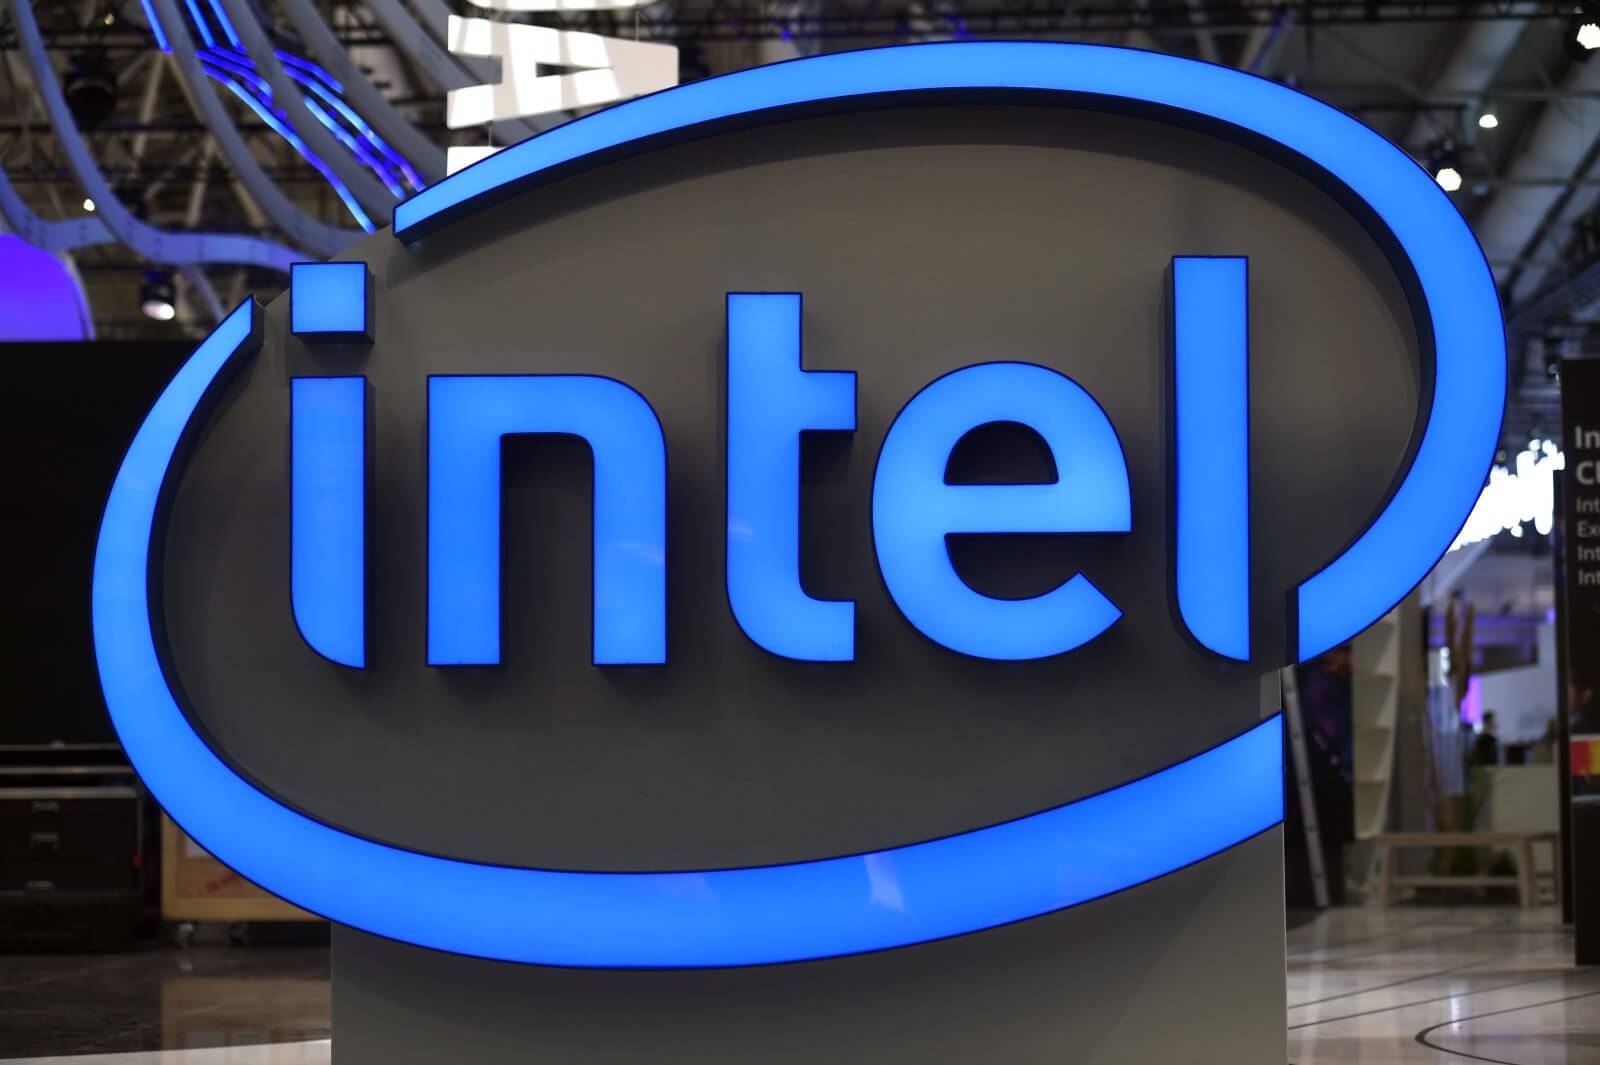 Intel shows off Xeon Platinum CPU with up to 56 cores and 112 threads